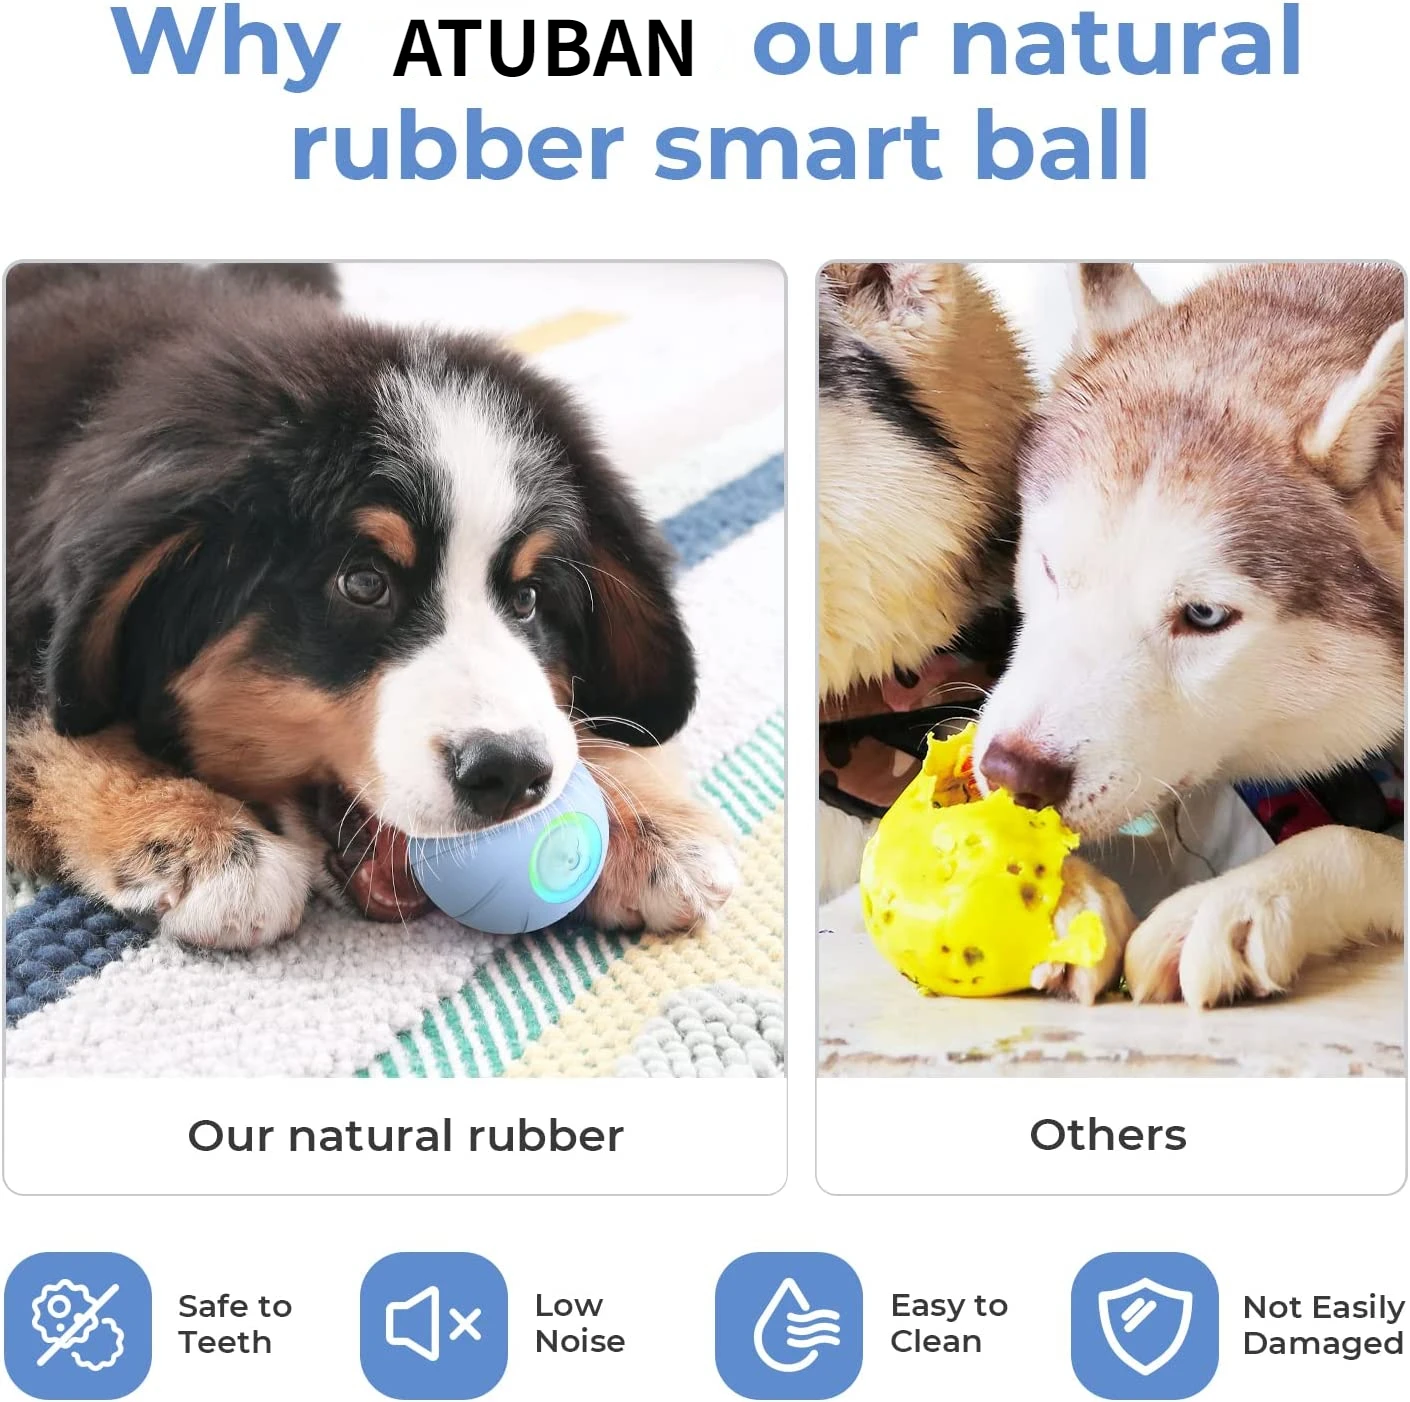 https://ae01.alicdn.com/kf/Sa118fac704bb4e72b818194caf6ce2c5M/ATUBAN-Intelligent-Interactive-Dog-Toy-Ball-Wicked-Ball-SE-Made-of-Natural-Rubber-Jumping-Activation-Ball.jpg